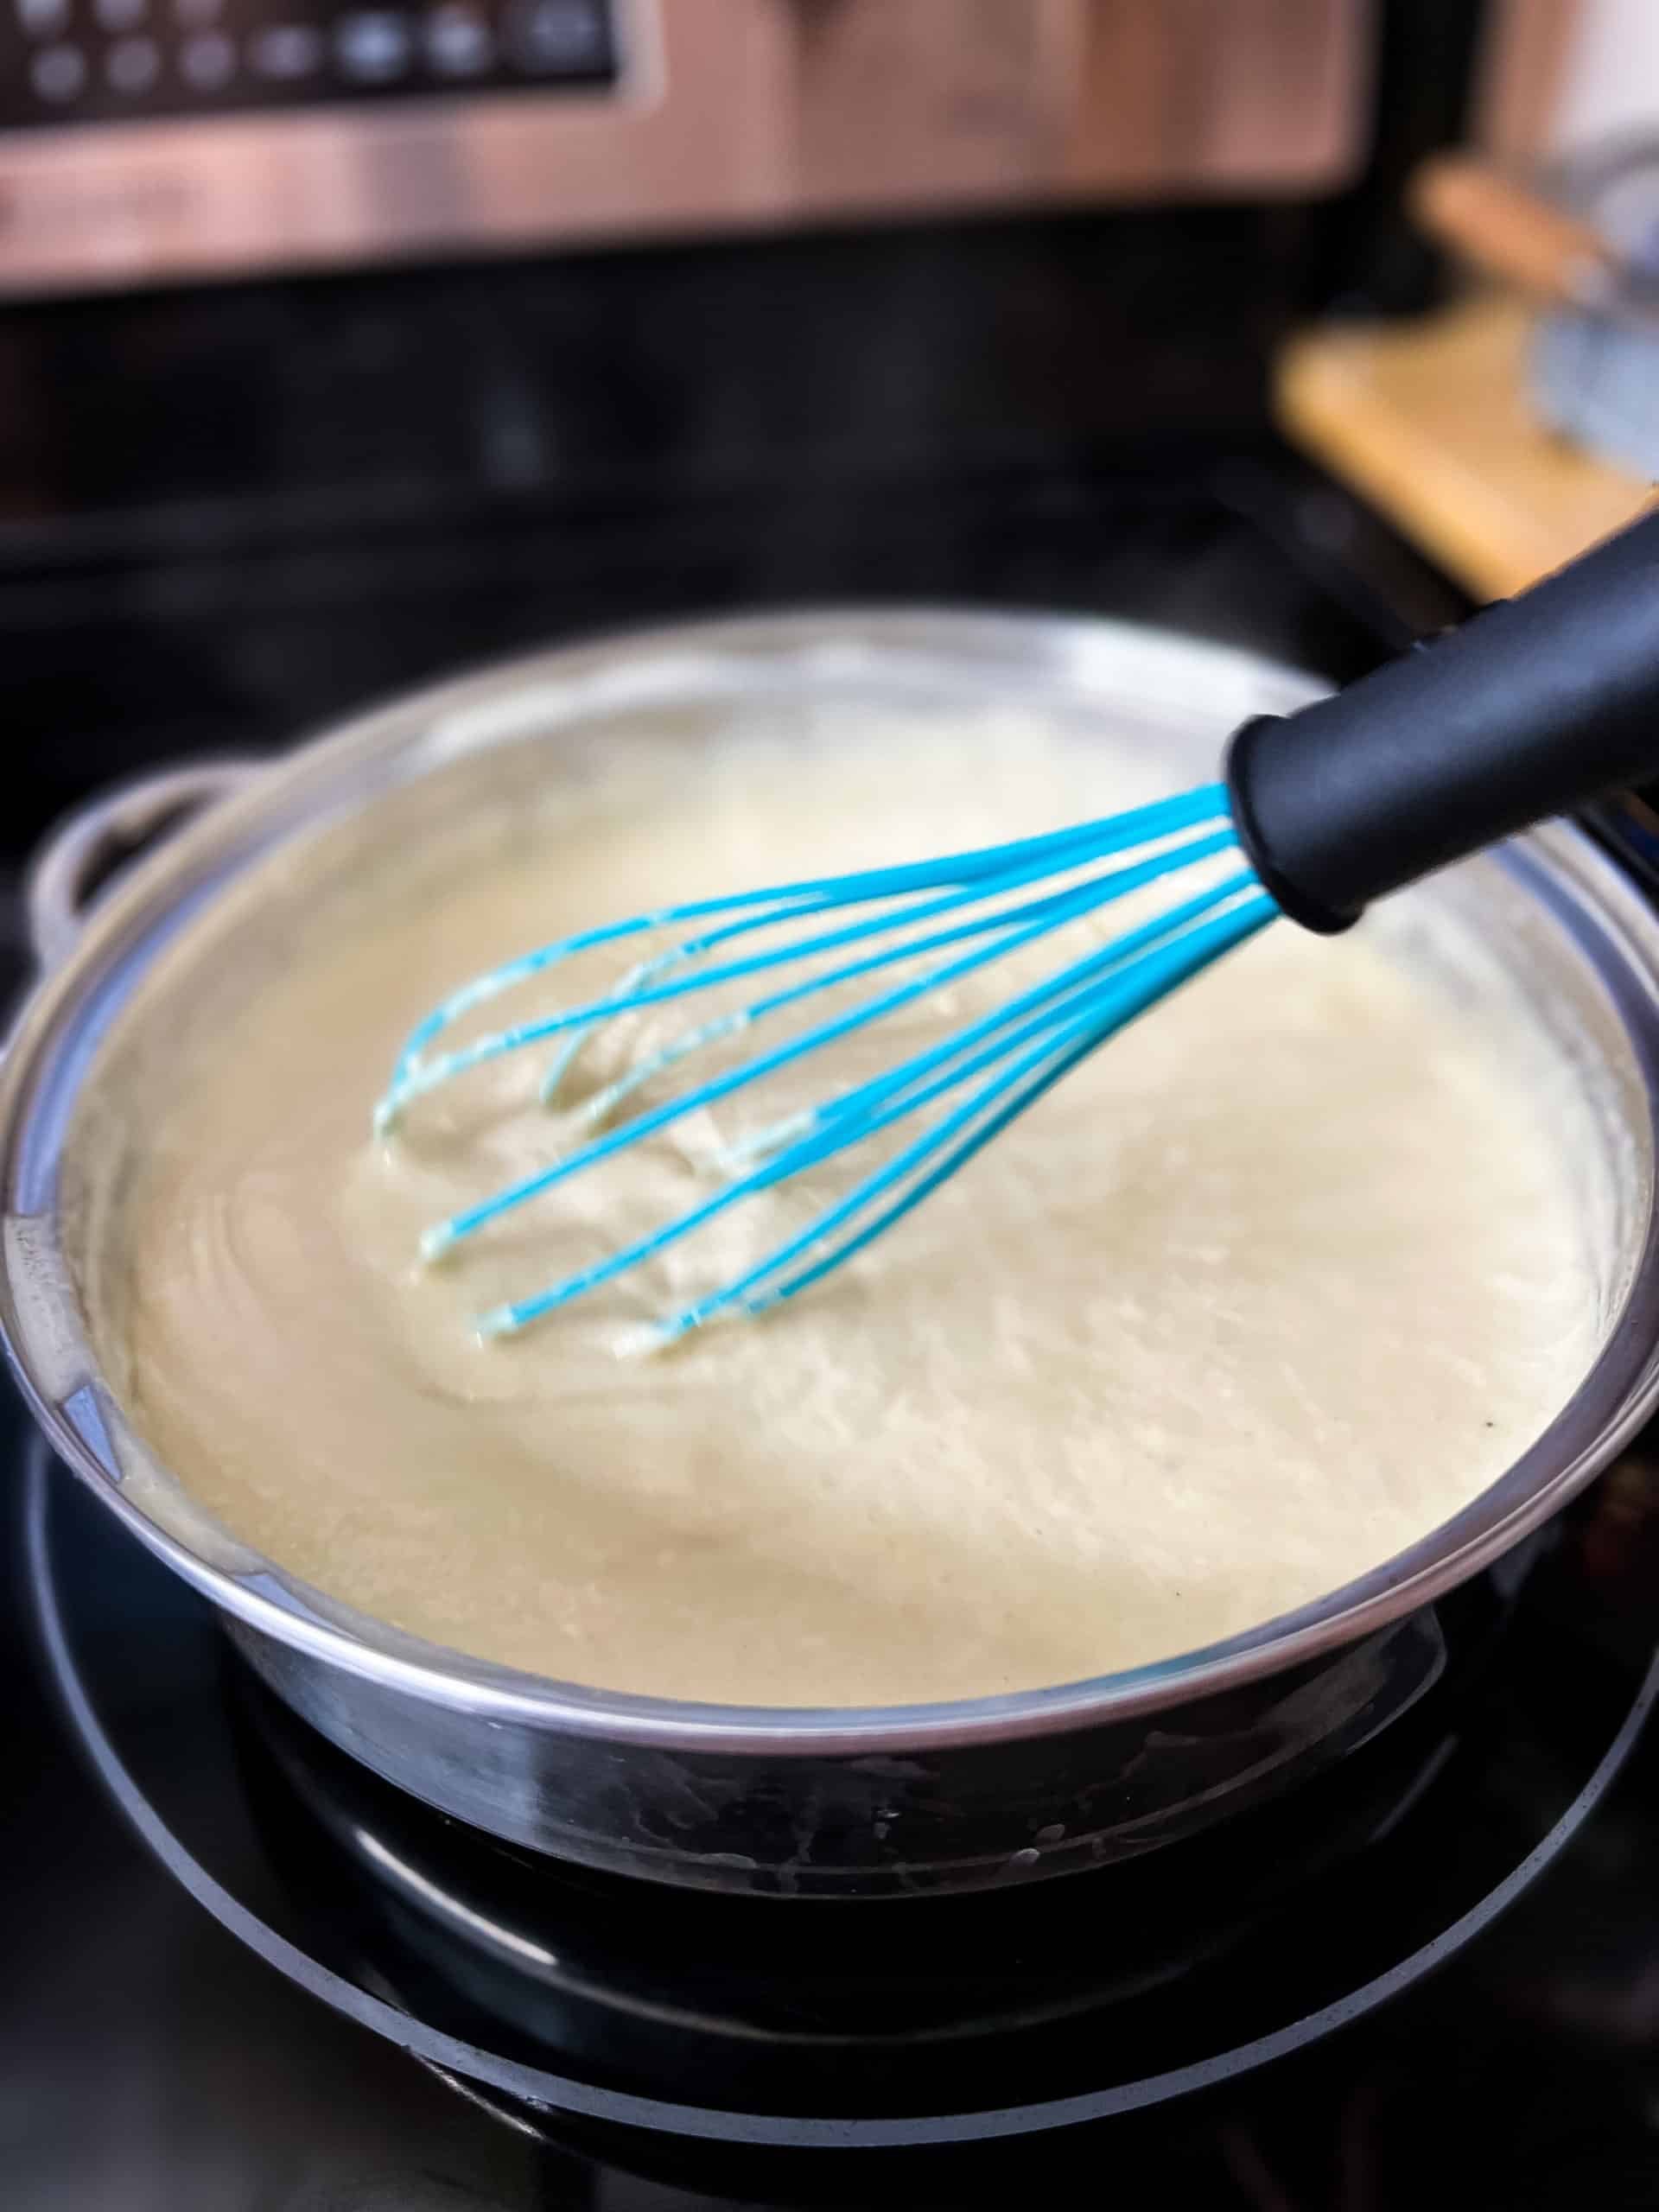 a turquoise colored whisk stirring Alfredo sauce in a stainless steel pan